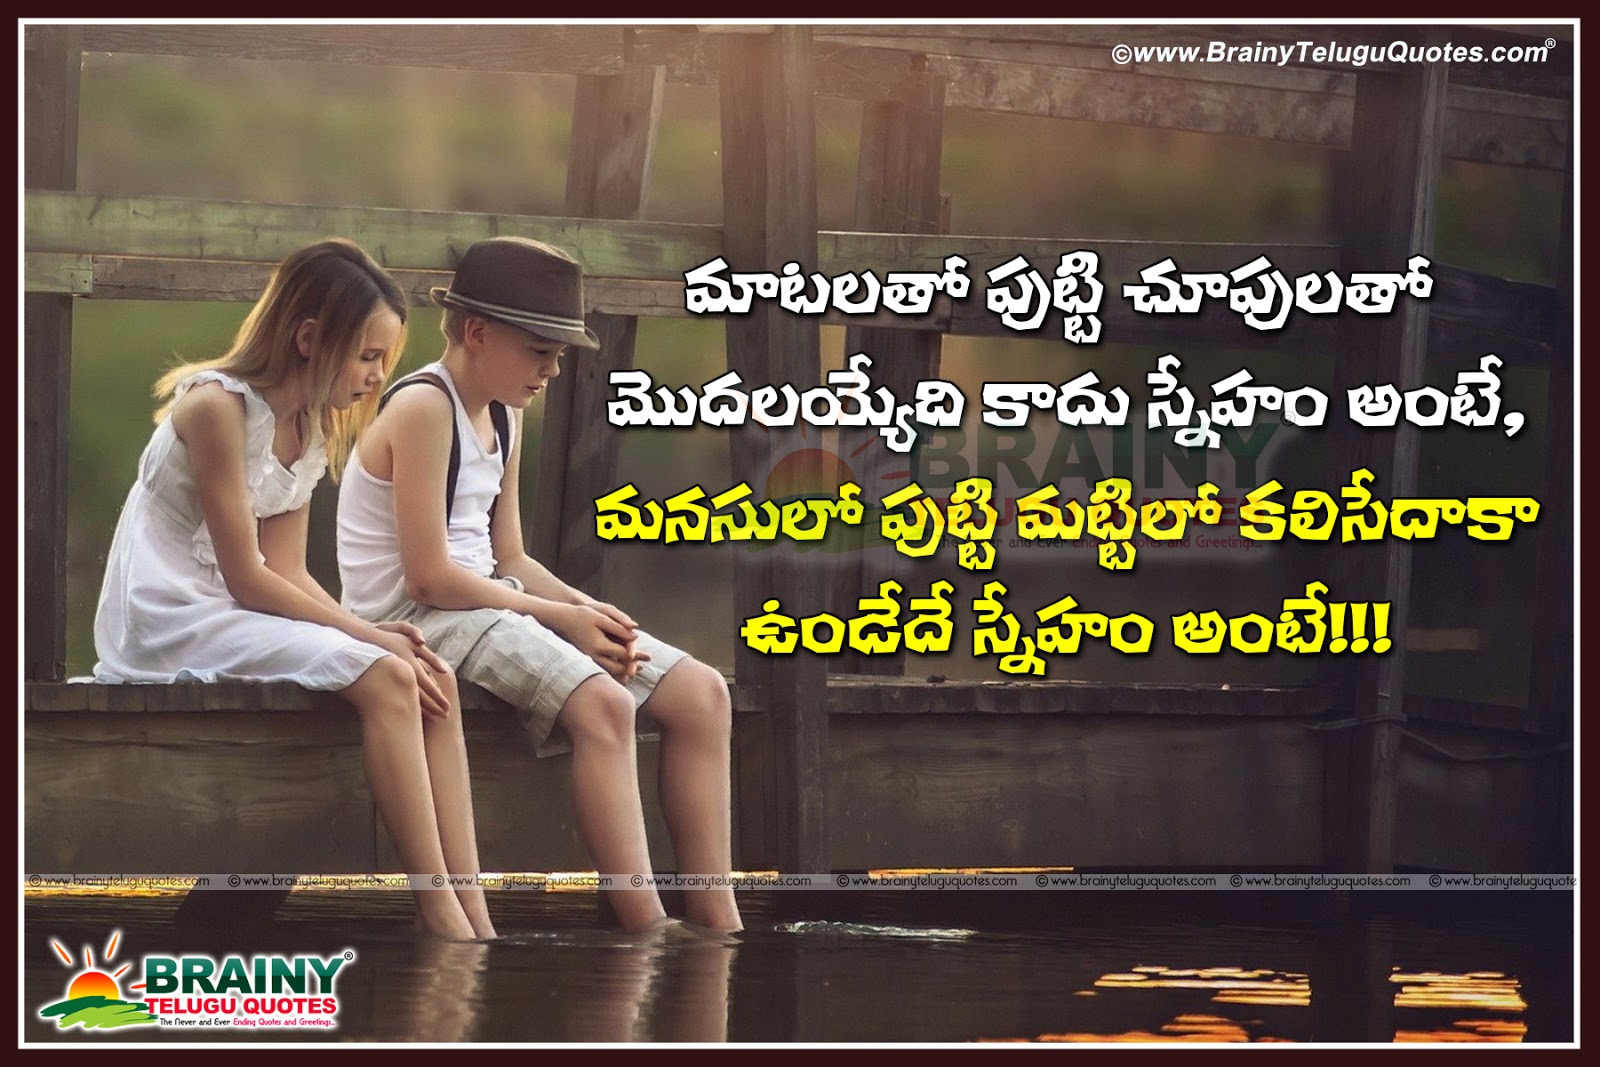 Telugu Top Inspiring Best Friendship Relationship Quotes And Nice Wallpapers Brainyteluguquotes Comtelugu Quotes English Quotes Hindi Quotes Tamil Quotes Greetings